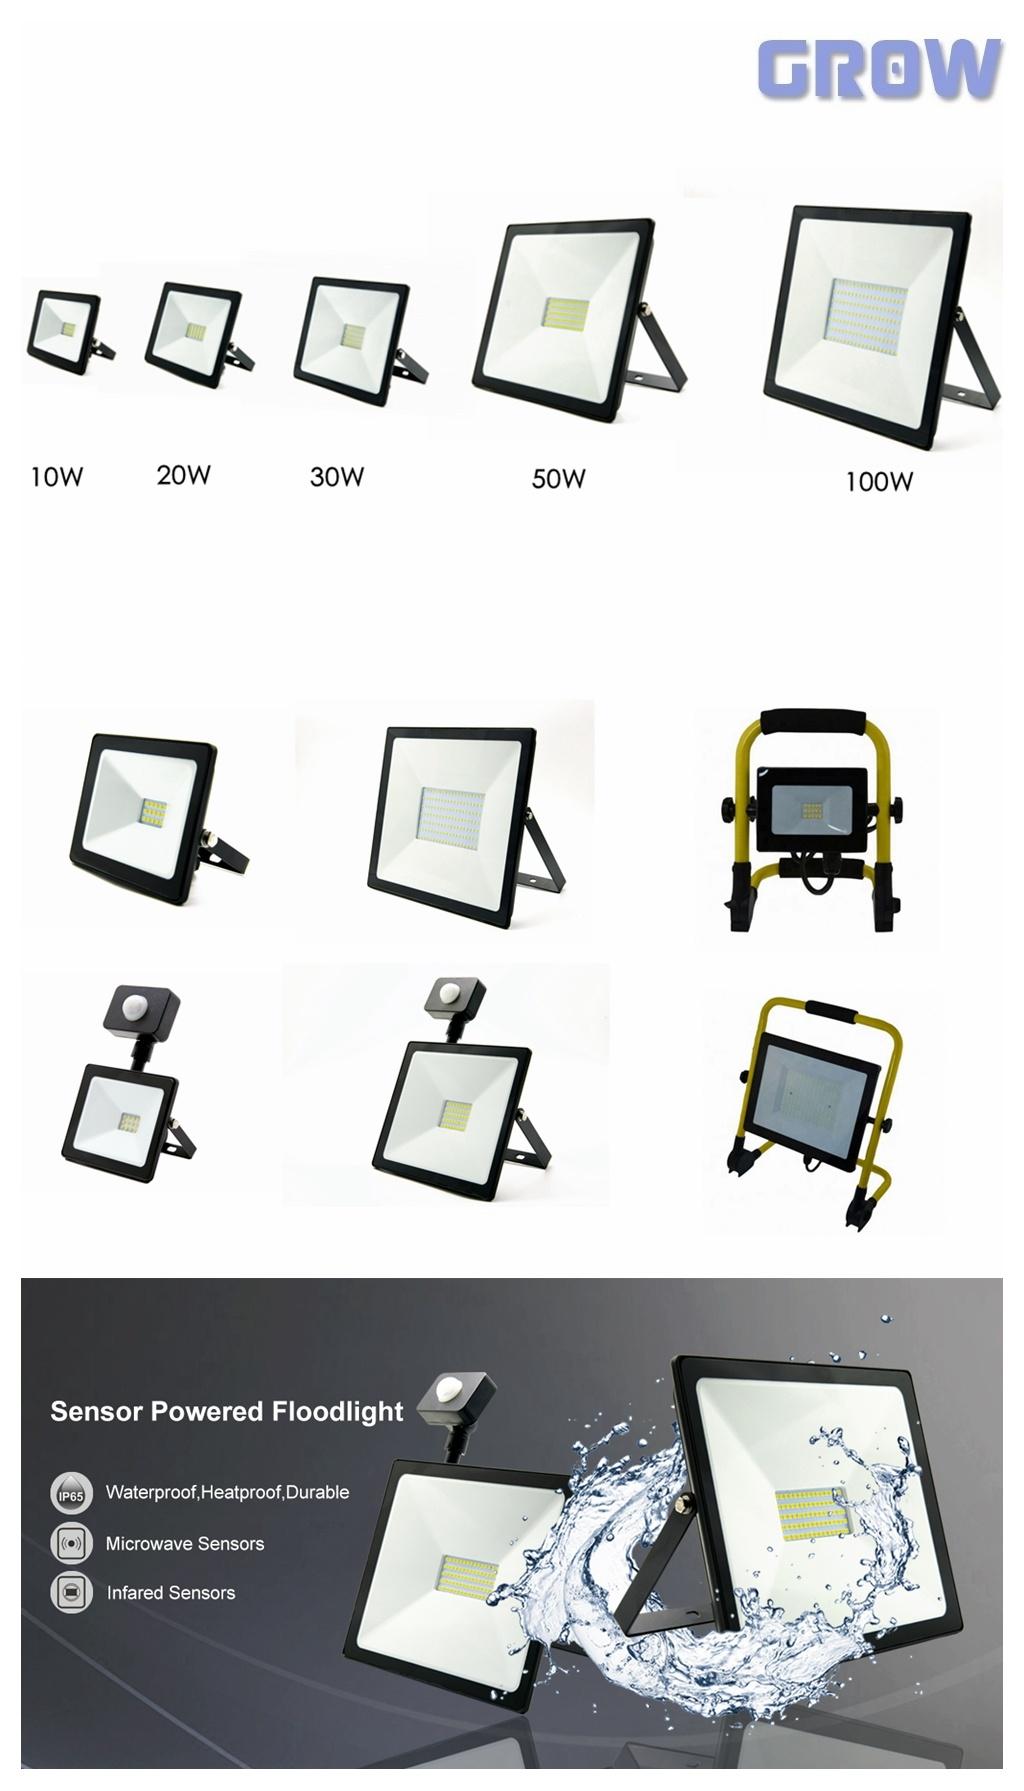 Distributor of LED Floodlight of LED Flood Industrial Outdoor Lighitng 300W with 5years Warranty